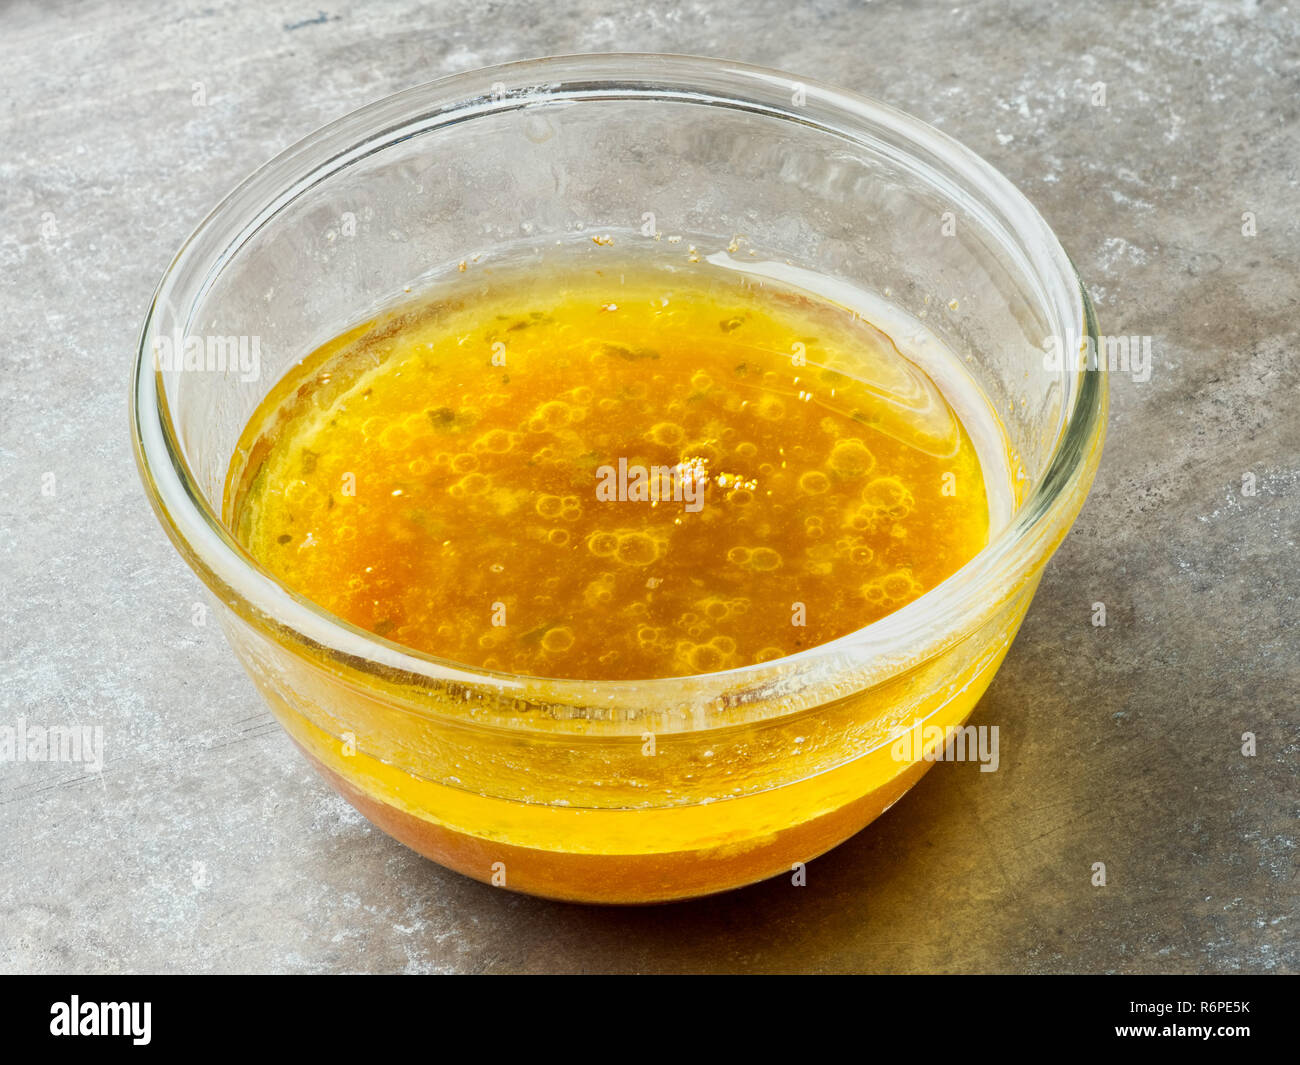 bowl of roast meat drippling Stock Photo